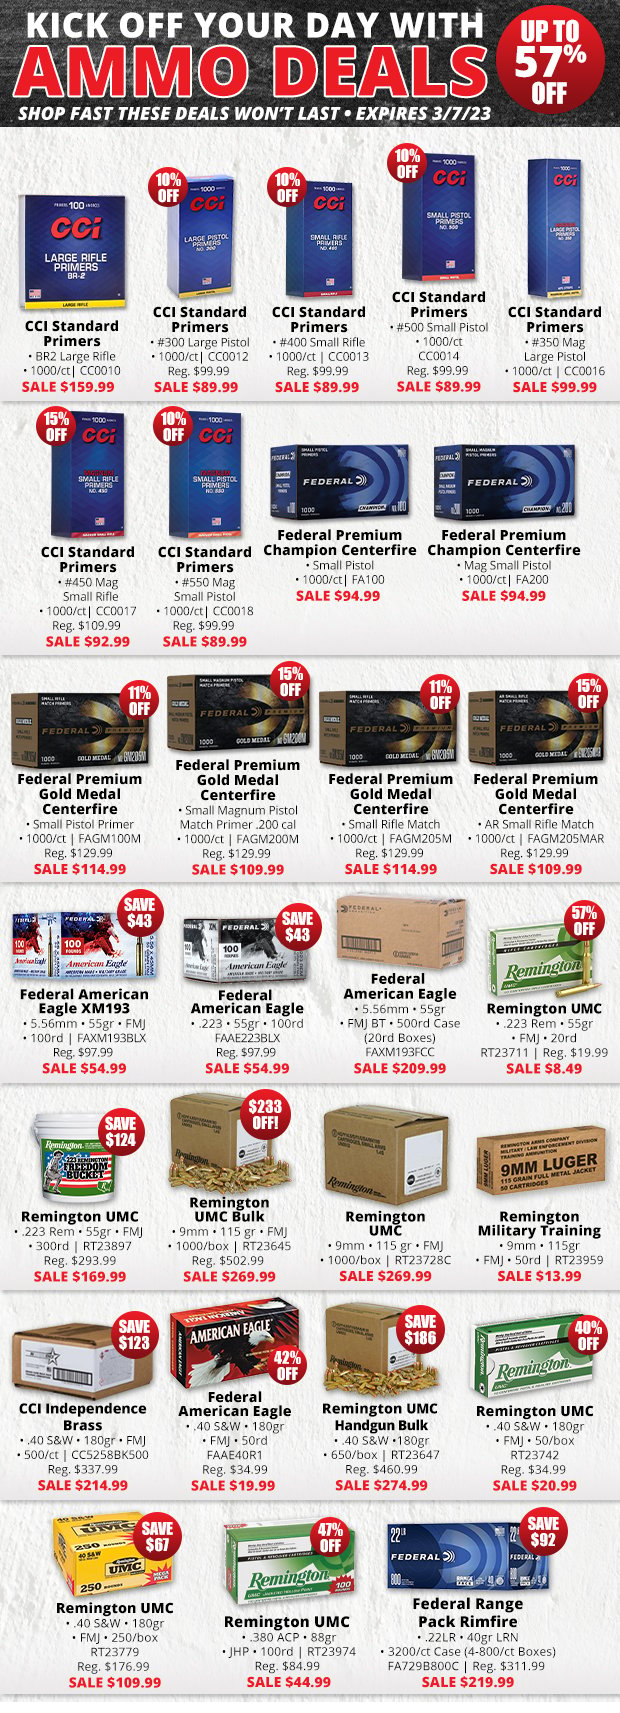 Ammo Deals Up to 57% Off